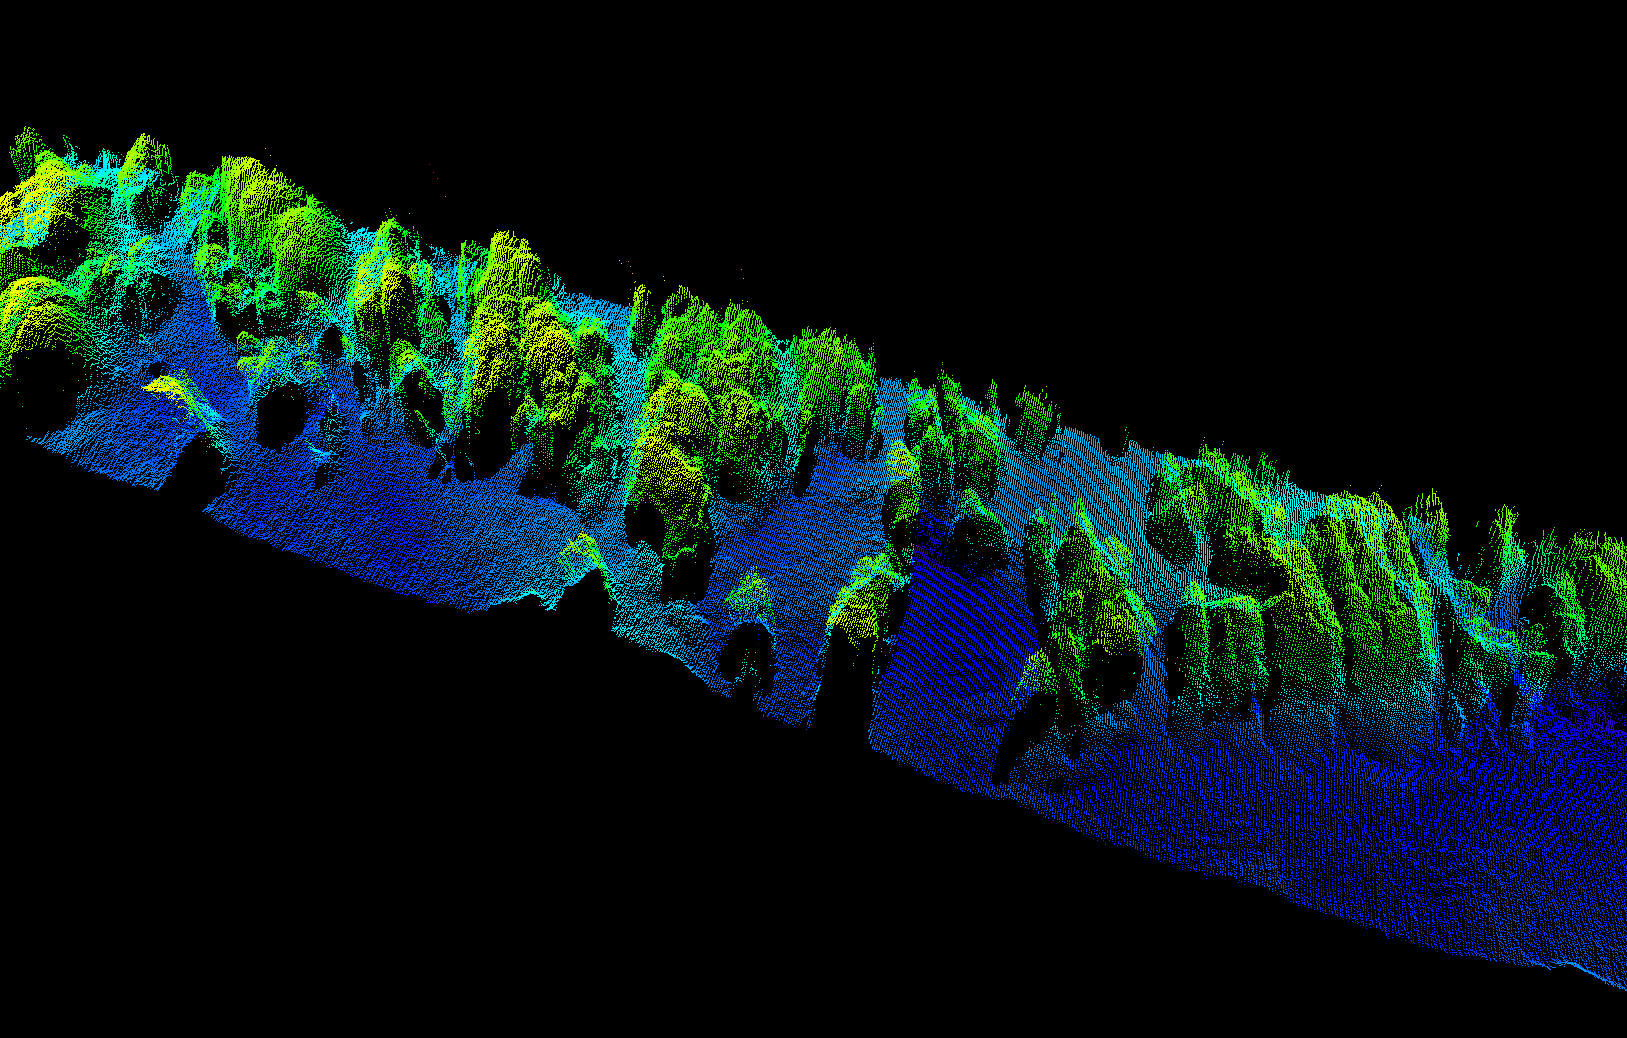 Bathymetric model of clay outcrops on the lakebed off Wisconsin in Lake Michigan.
